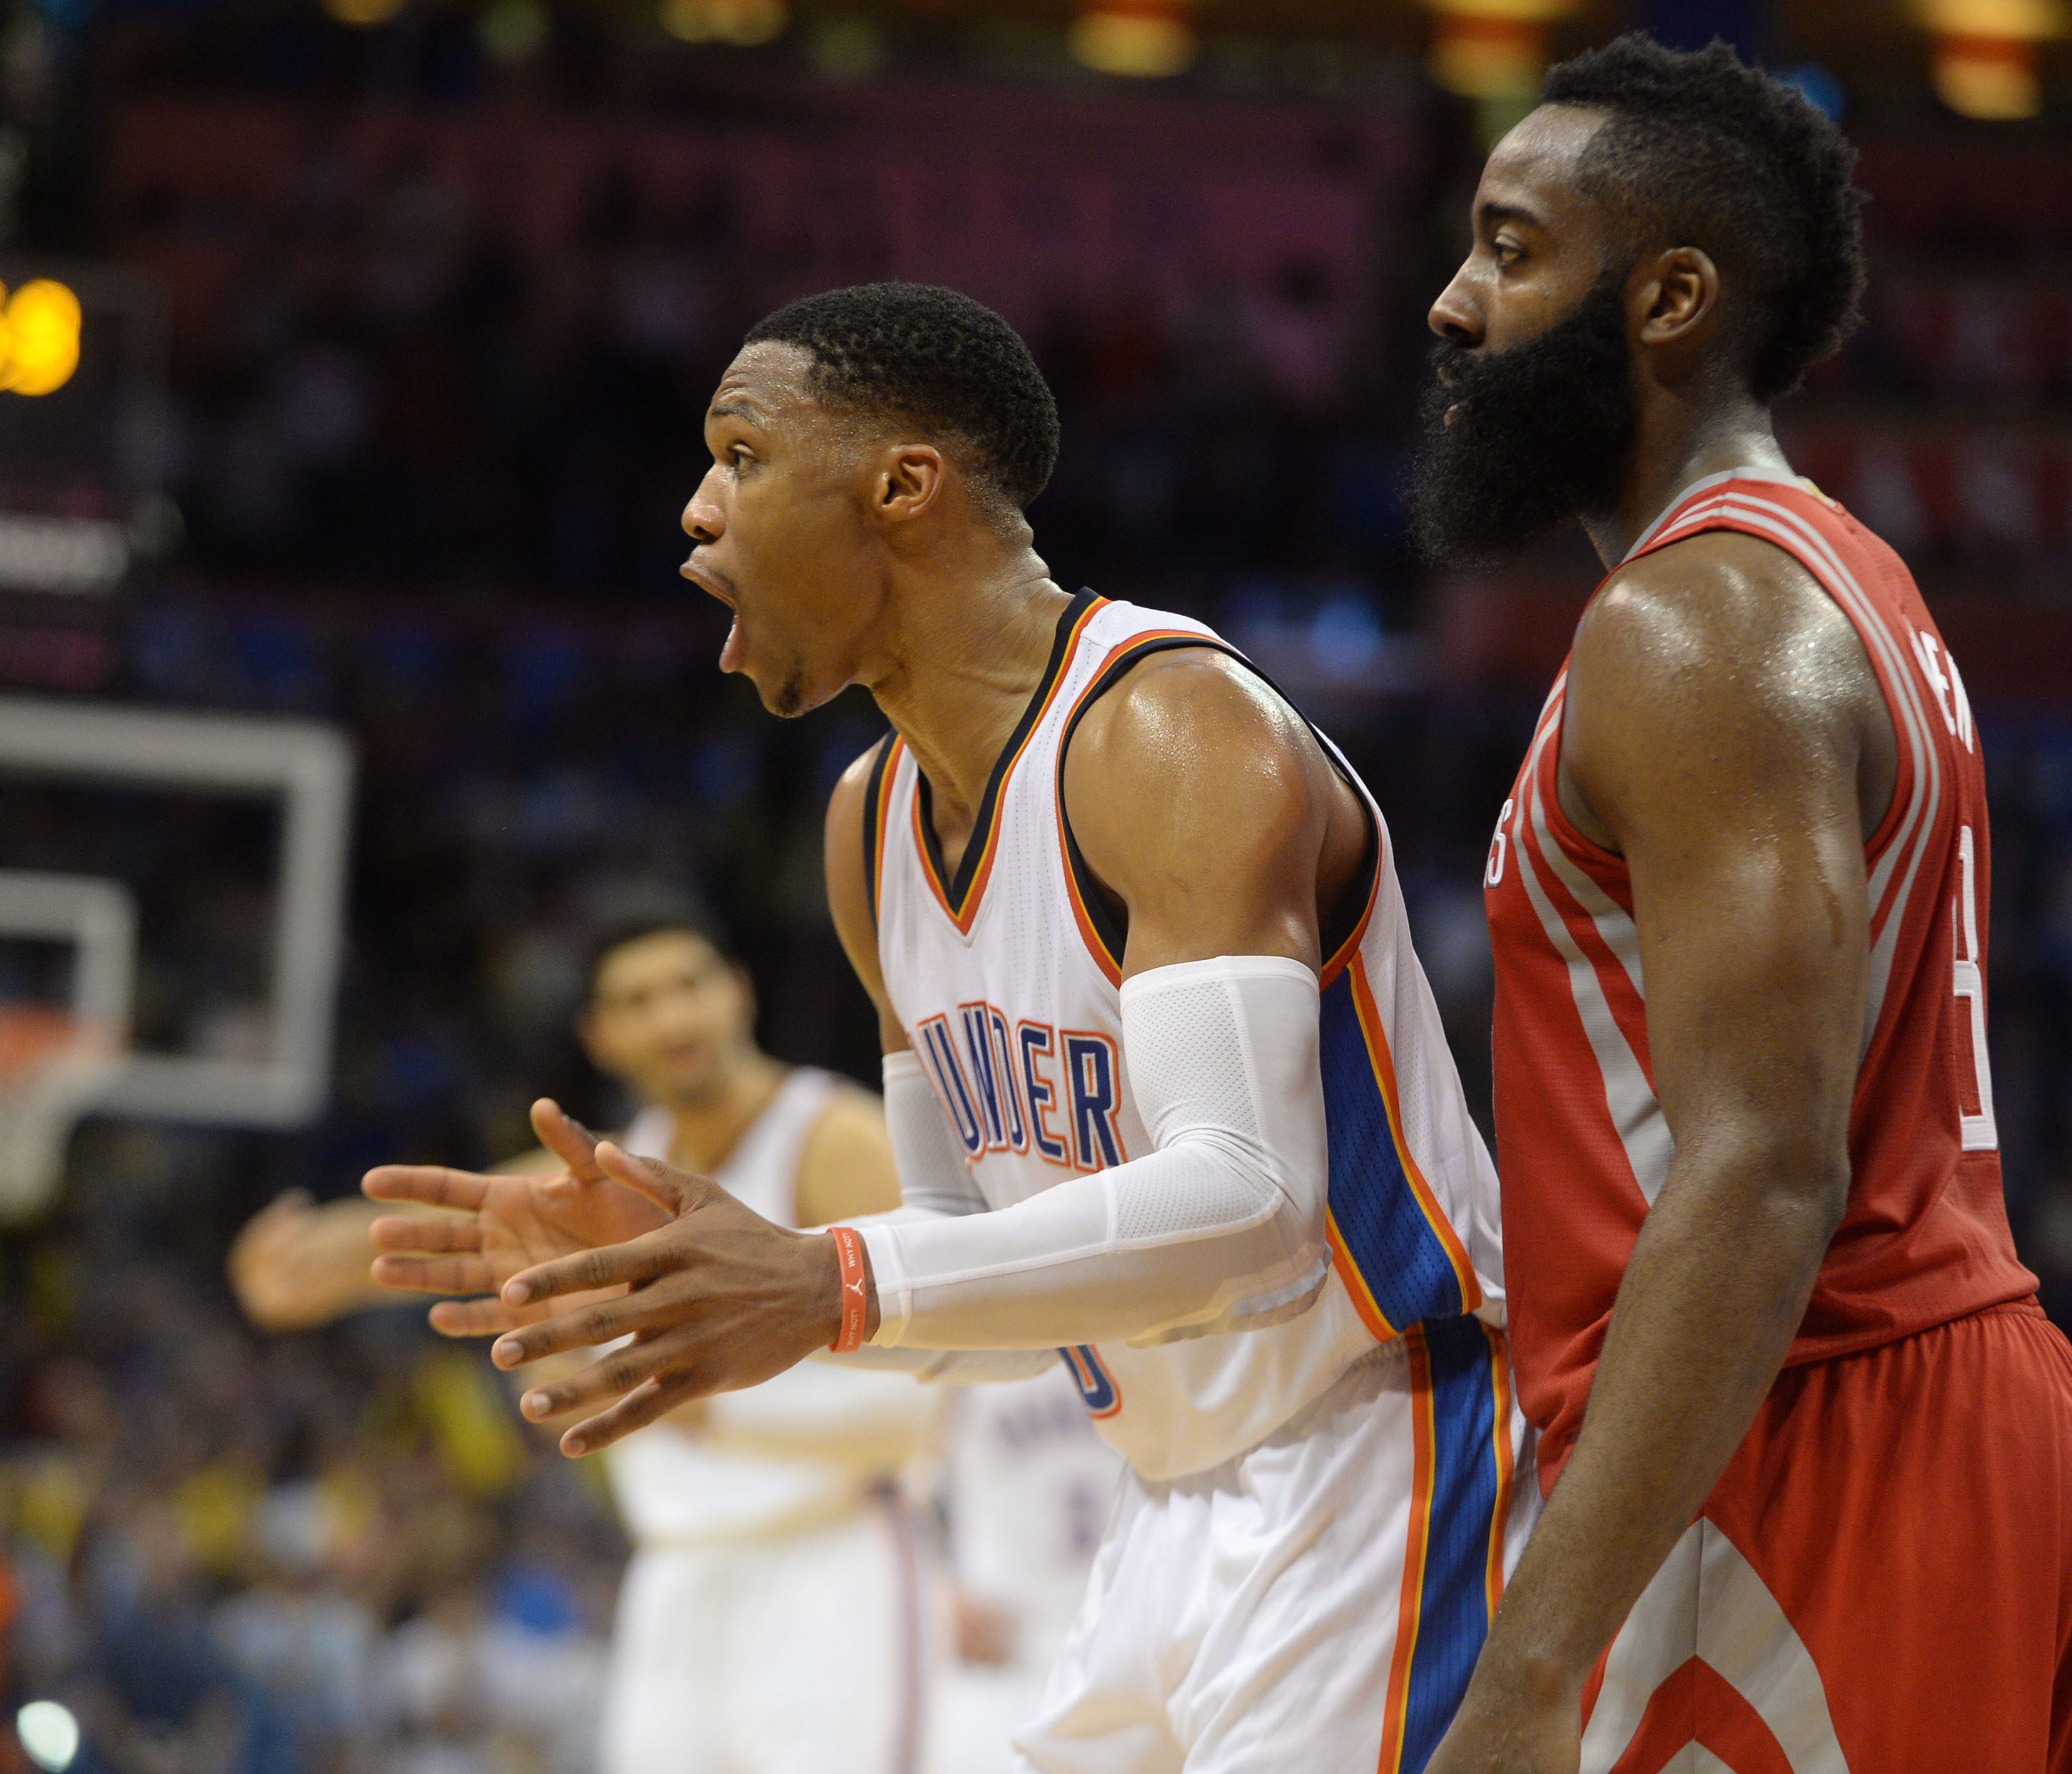 Oklahoma City Thunder guard Russell Westbrook (0) and Houston Rockets guard James Harden (13) react after a play against the Houston Rockets during the fourth quarter at Chesapeake Energy Arena. Mandatory Credit: Mark D. Smith-USA TODAY Sports